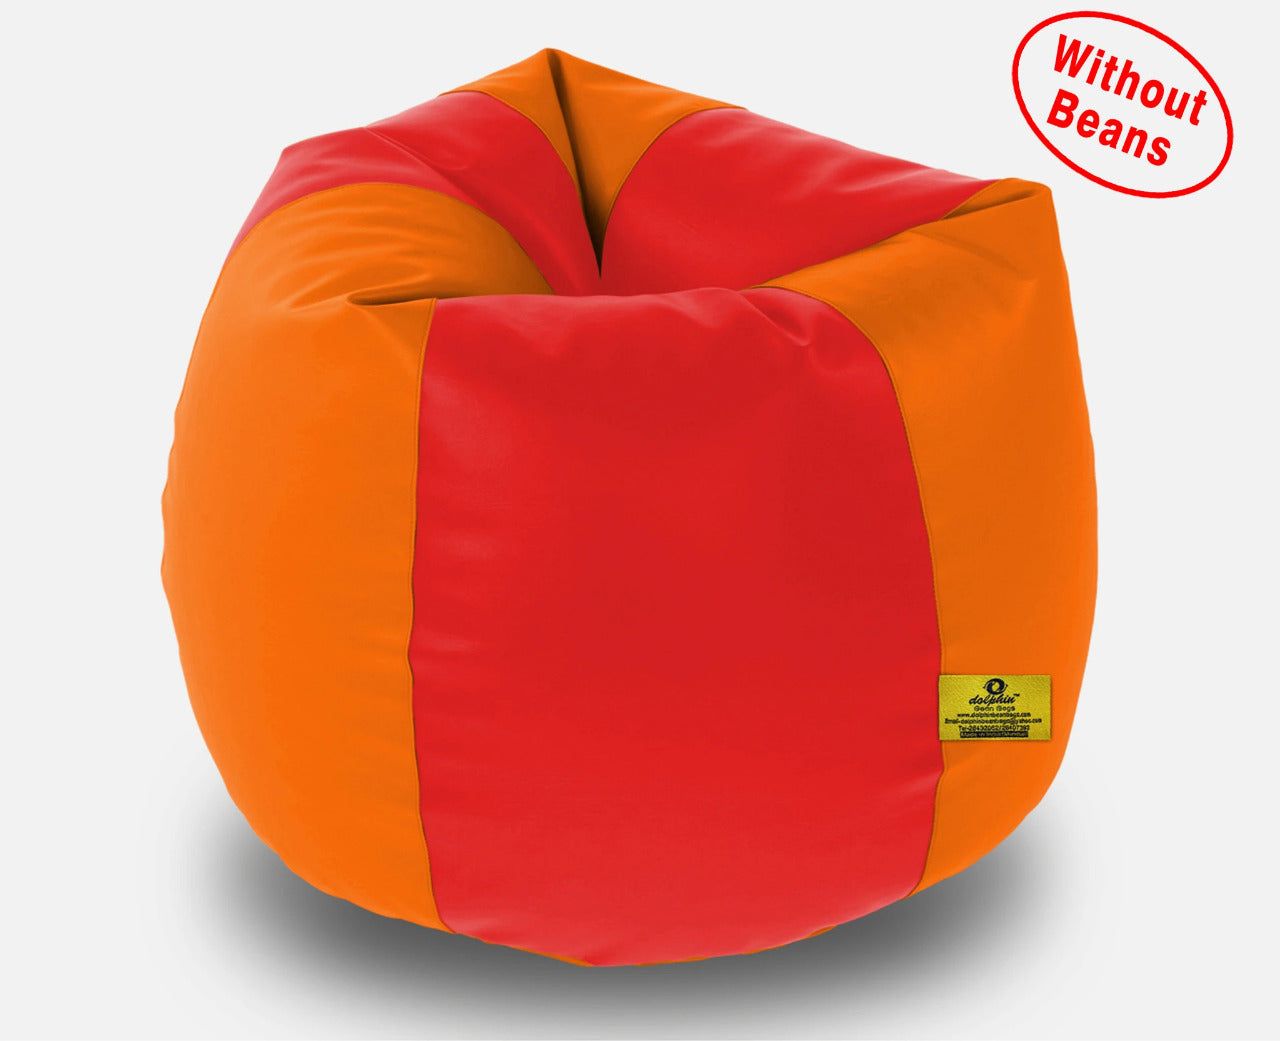 Bean Bag XXL RED&ORANGE BEAN BAG-COVER (Without Beans)